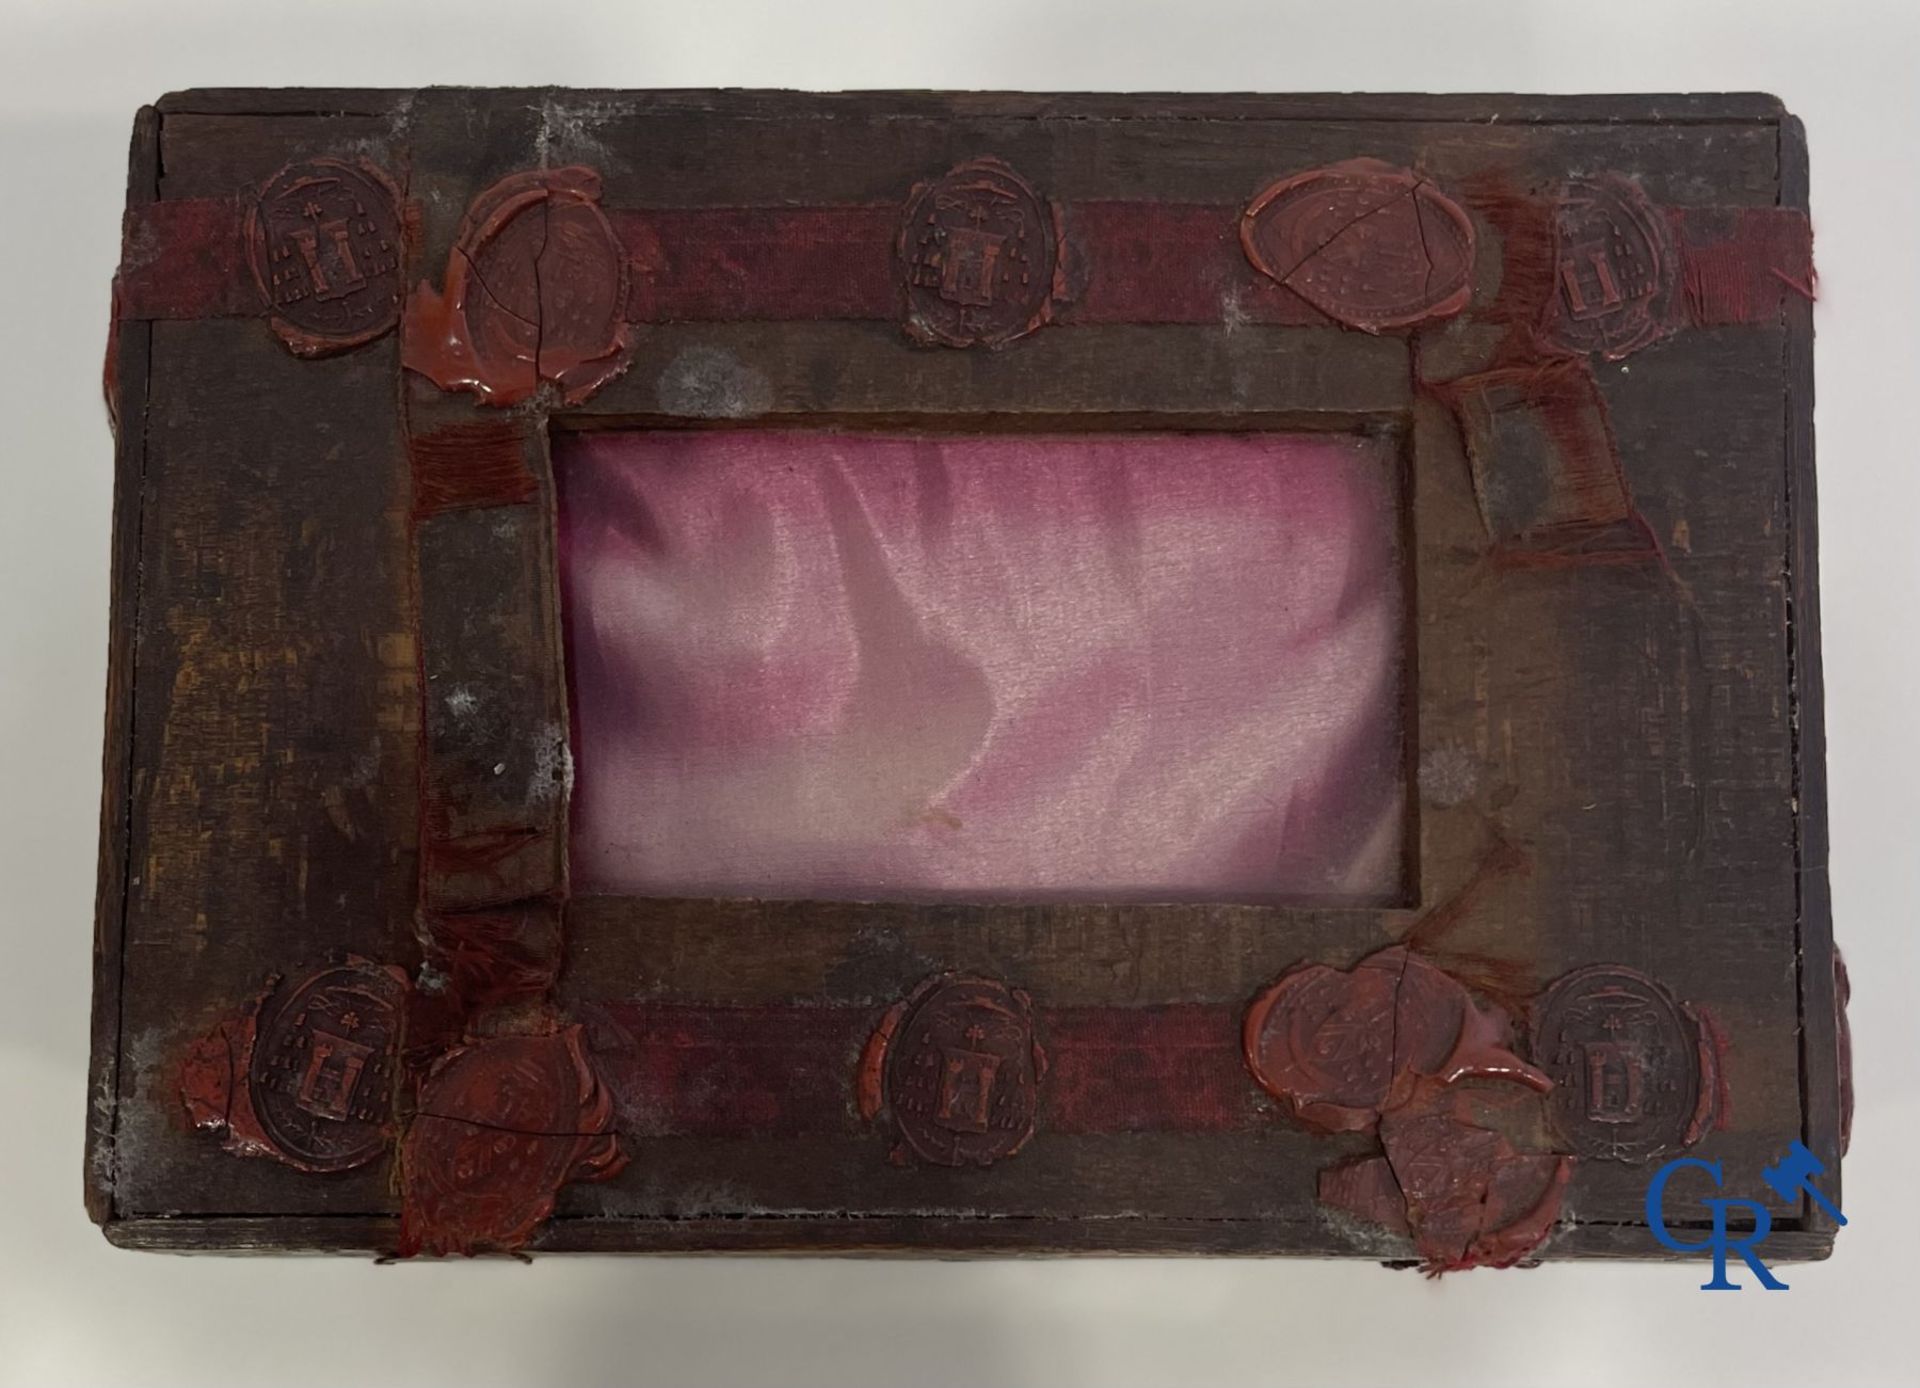 An antique wooden reliquary sealed with wax seals. Early 19th century. - Image 12 of 15